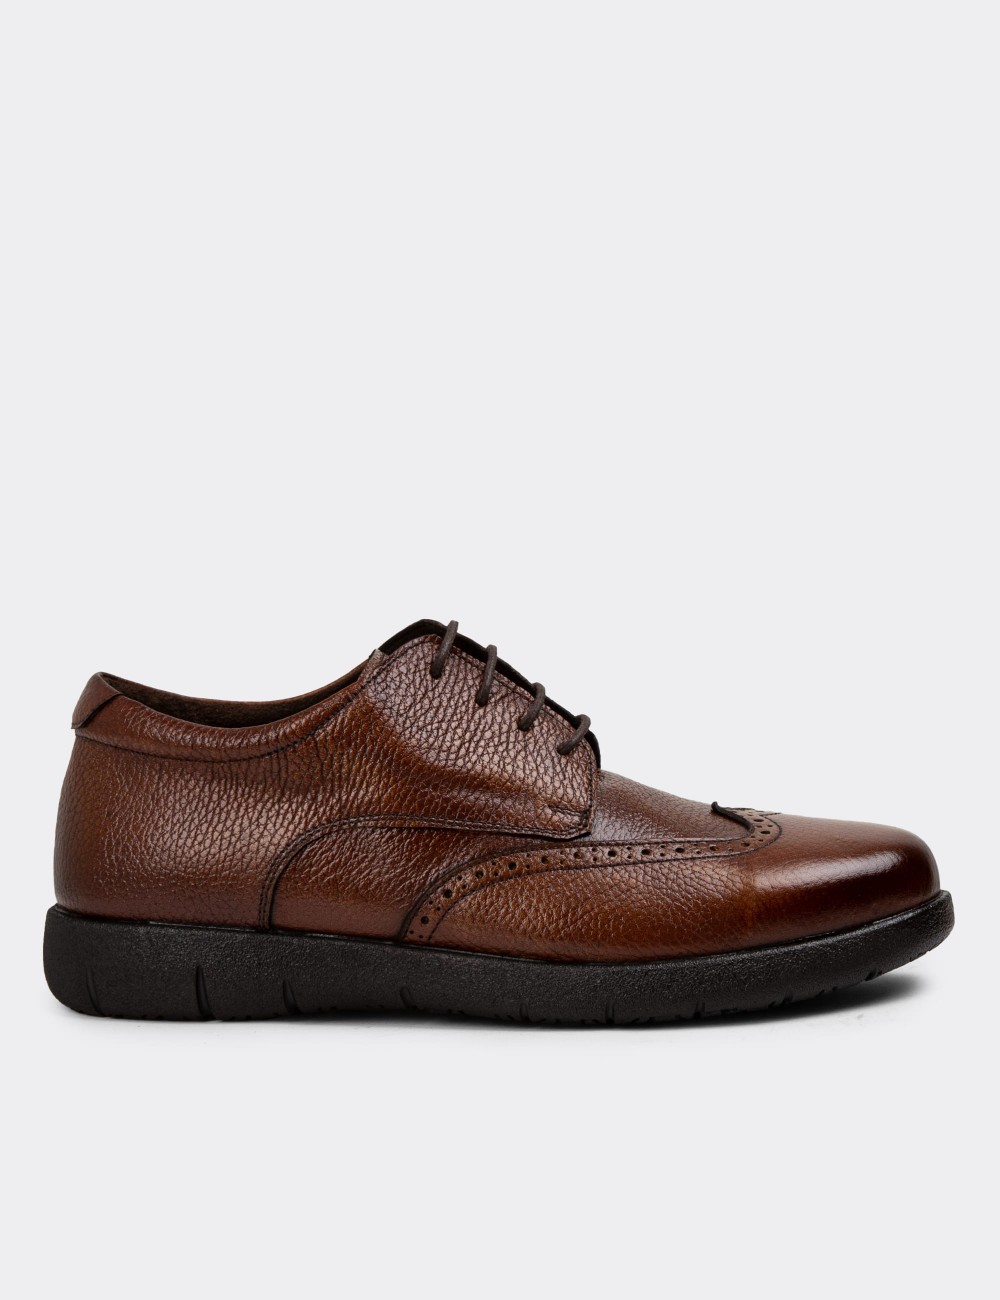 Tan Leather Lace-up Shoes - 01969MTBAC01